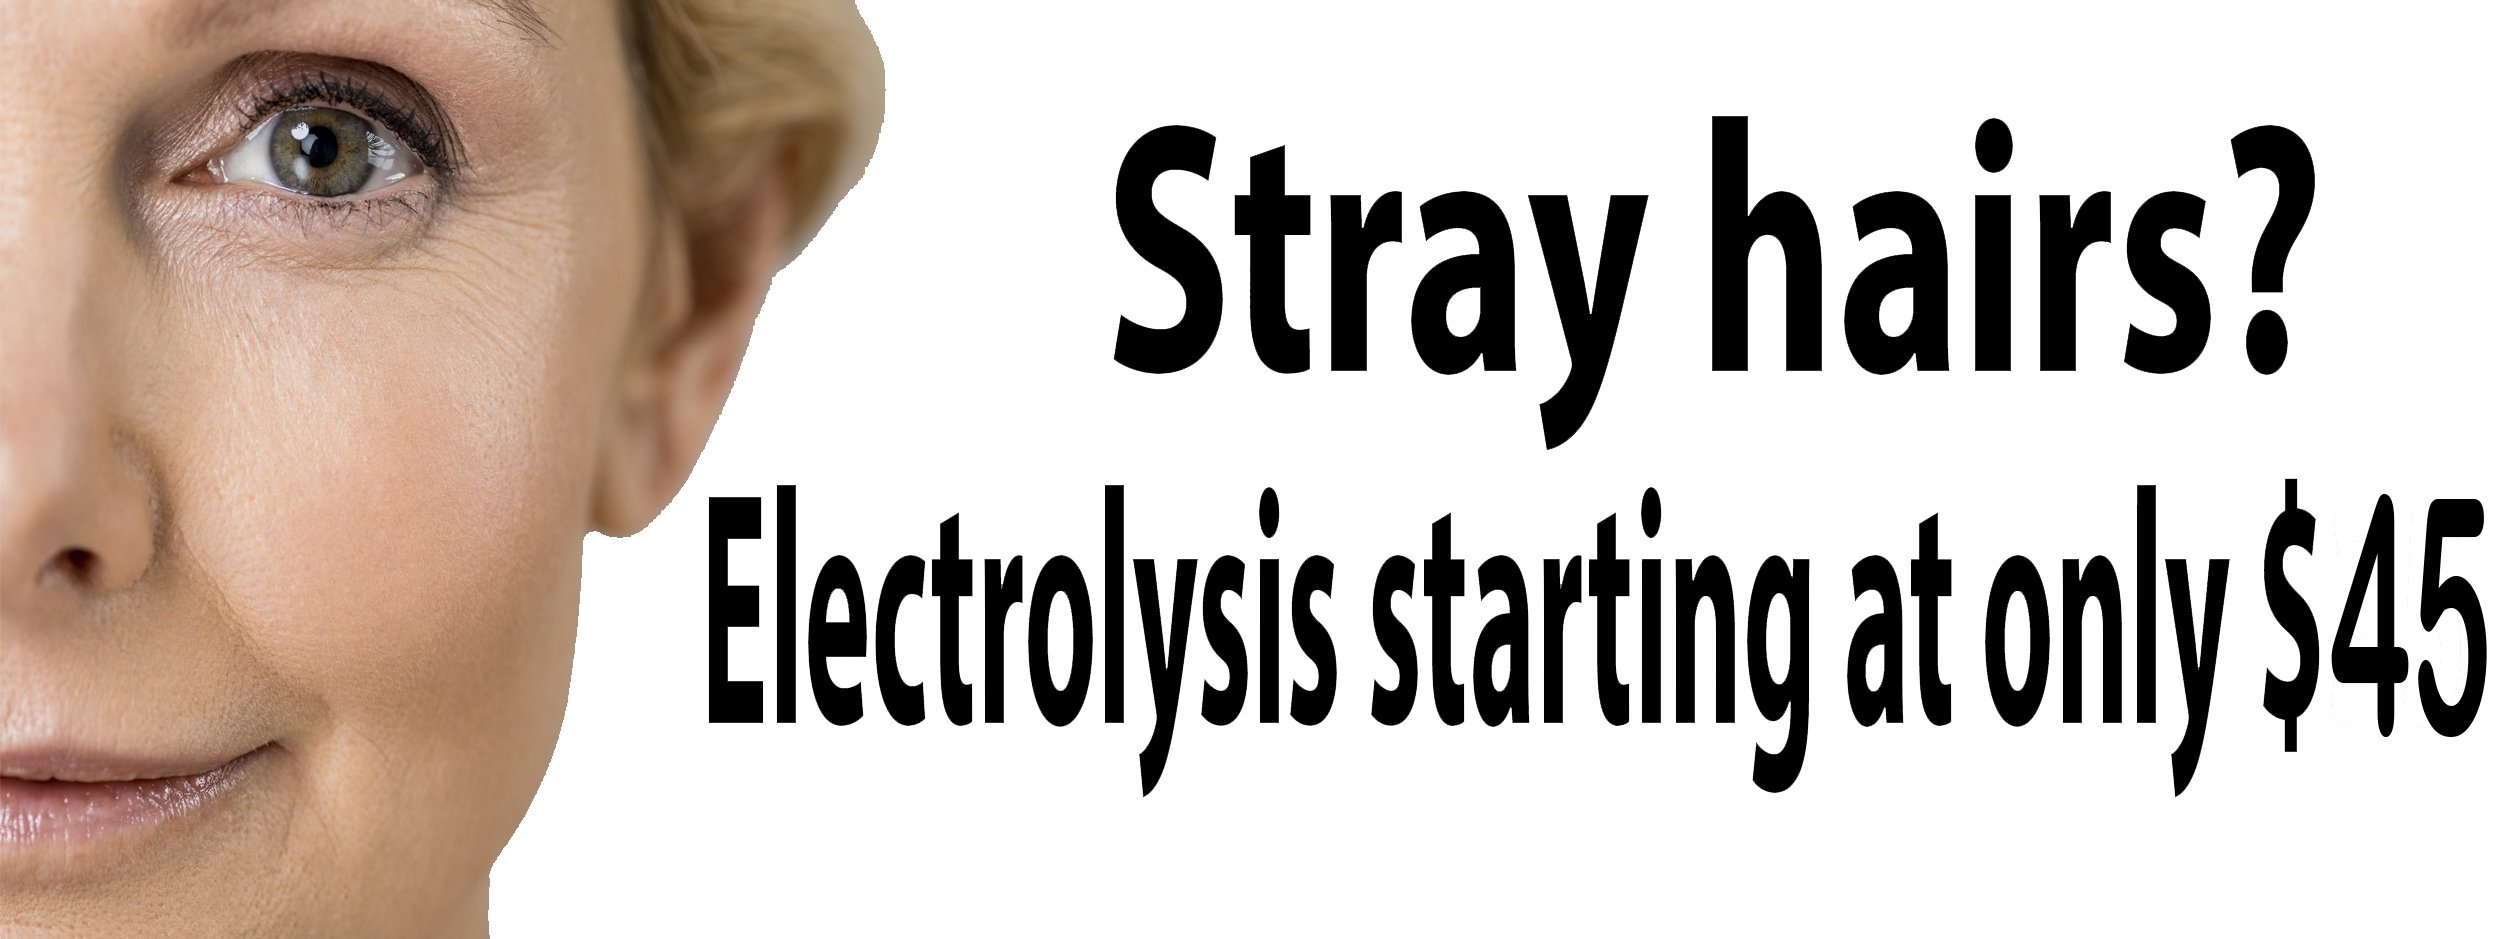  Do you have unwanted stray hairs? Or are you not a laser candidate due to light hair? Affordable electrolysis starts at only $40 at American Electrolysis and Laser. 